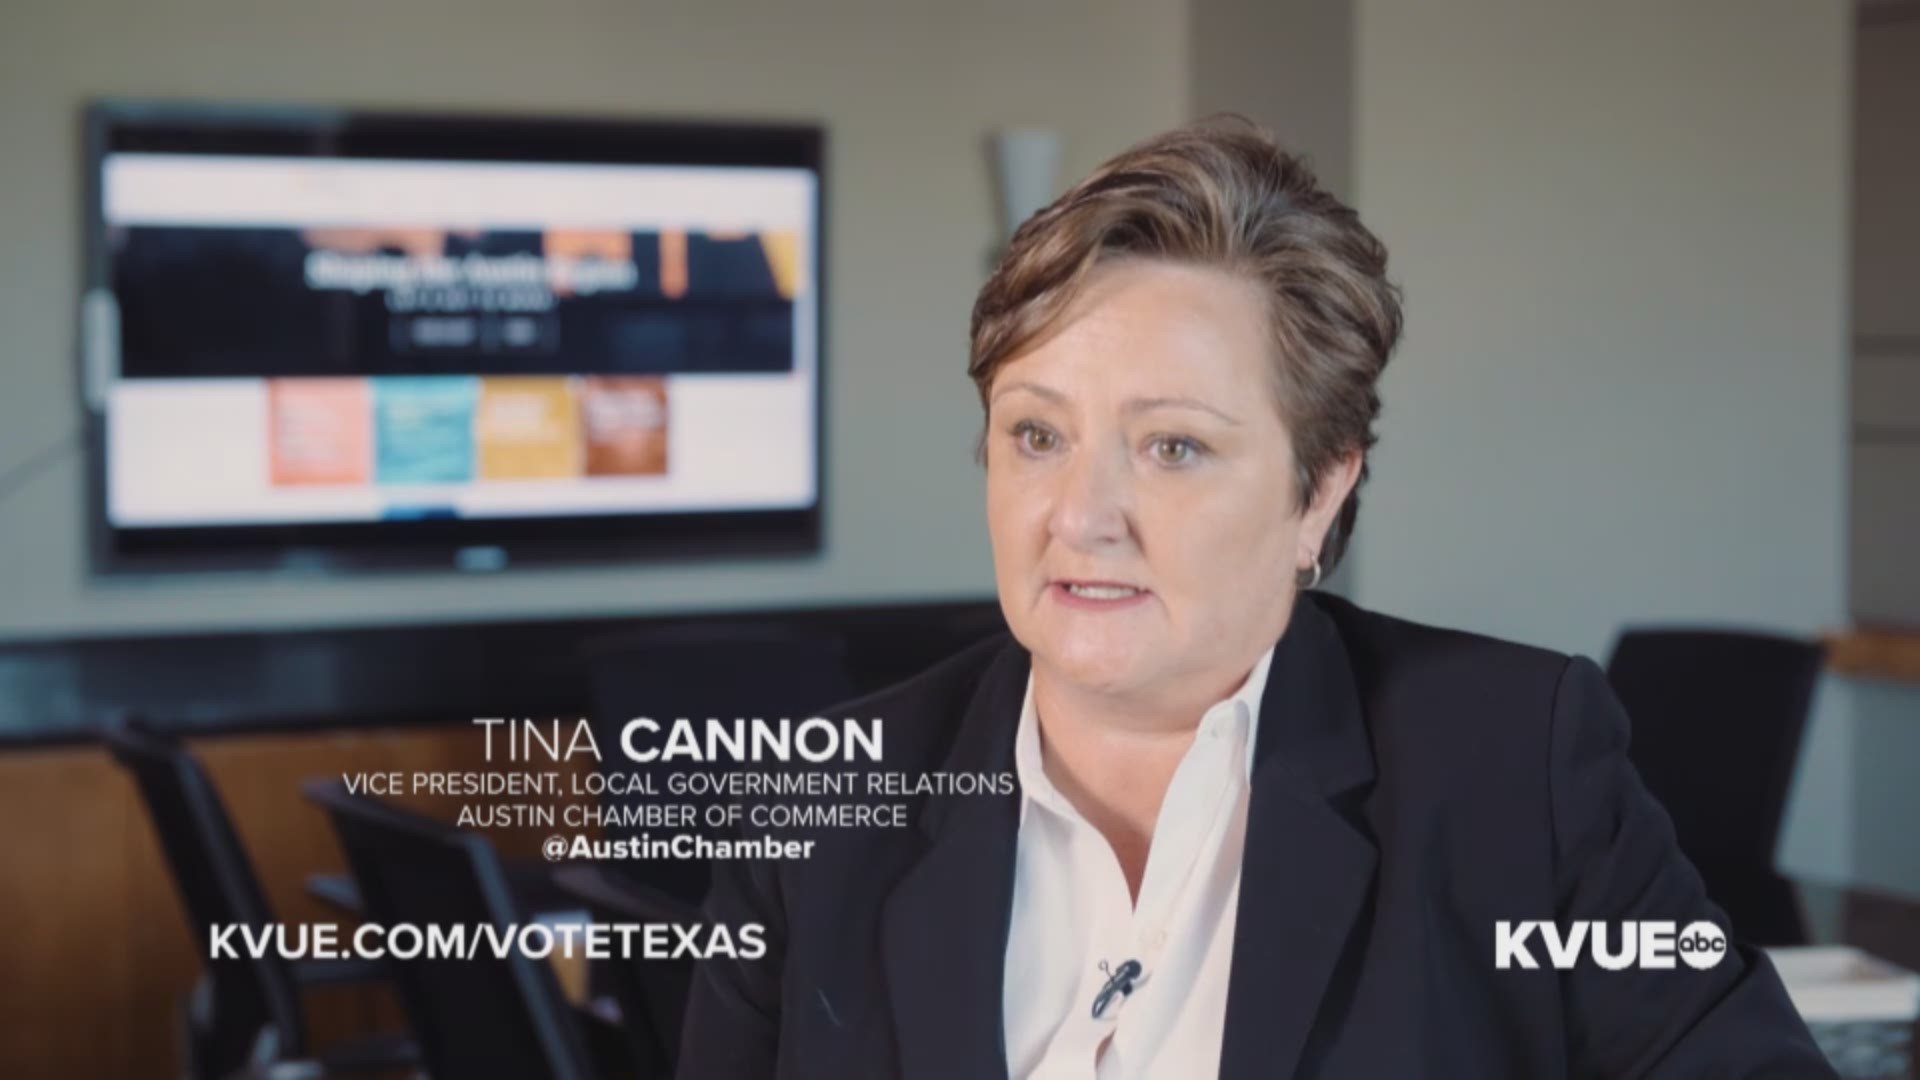 A promo with Tina Cannon from the Greater Austin Chamber of Commerce